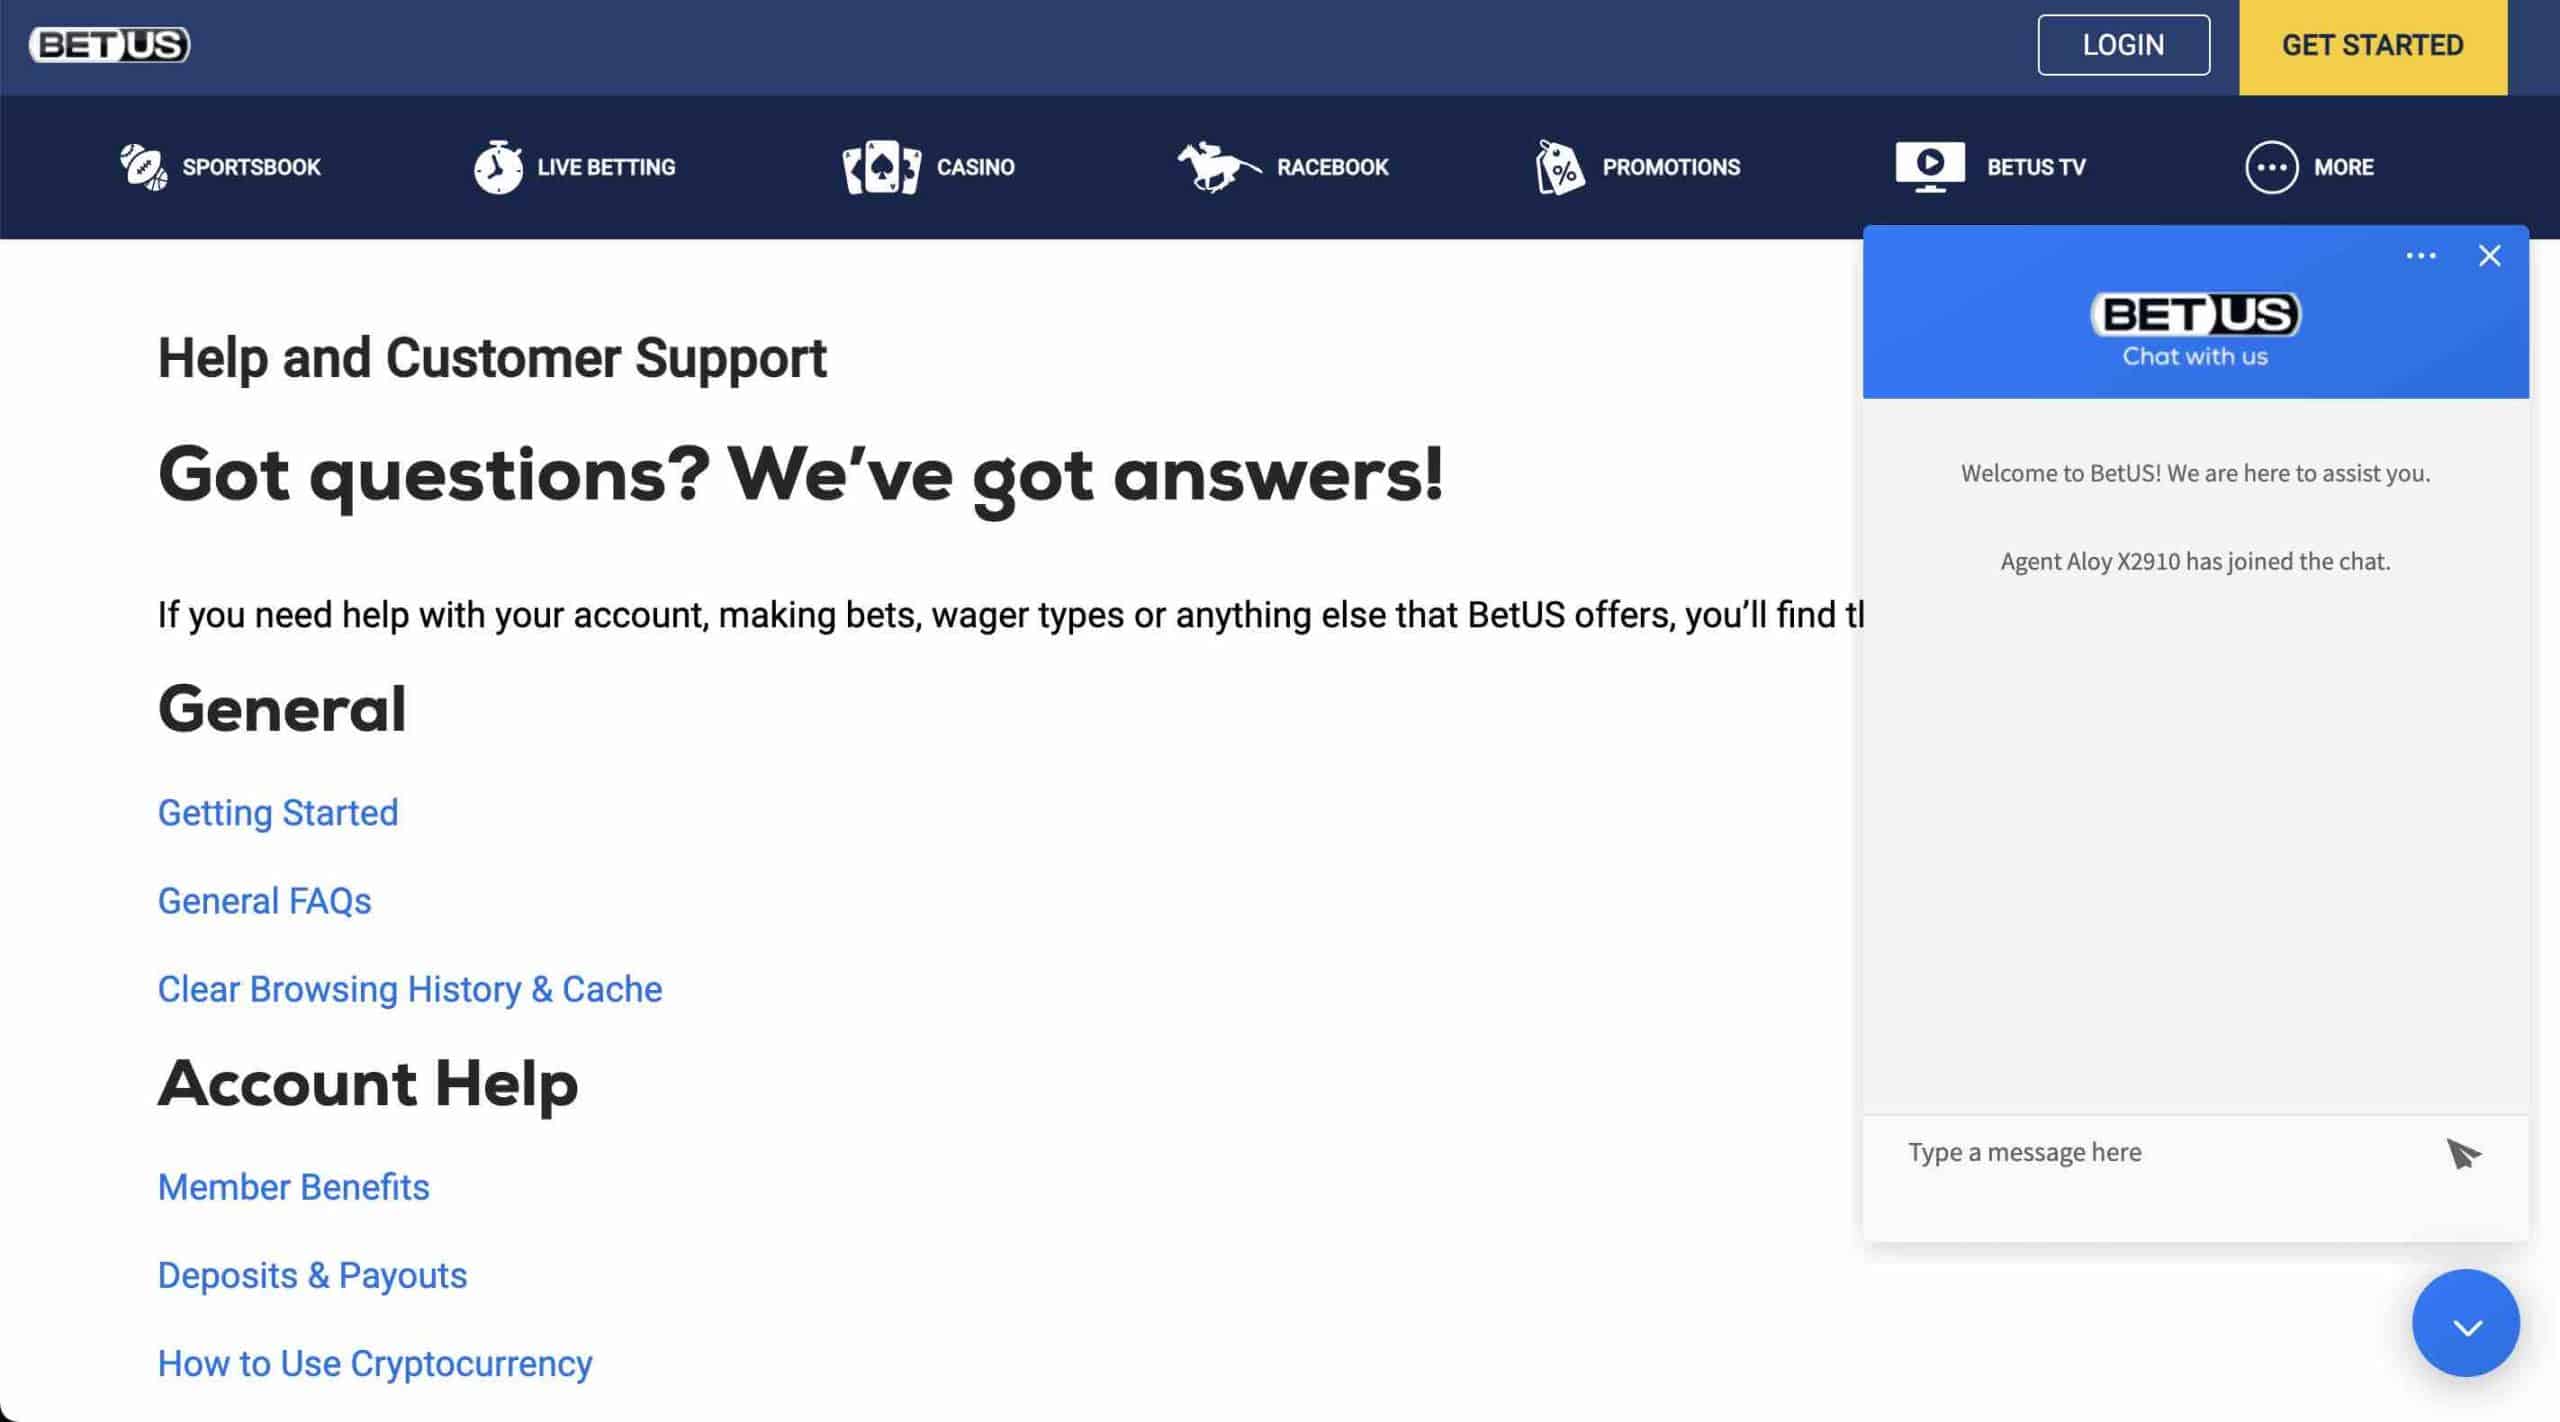 A screenshot of the help and customer support page at BetUS